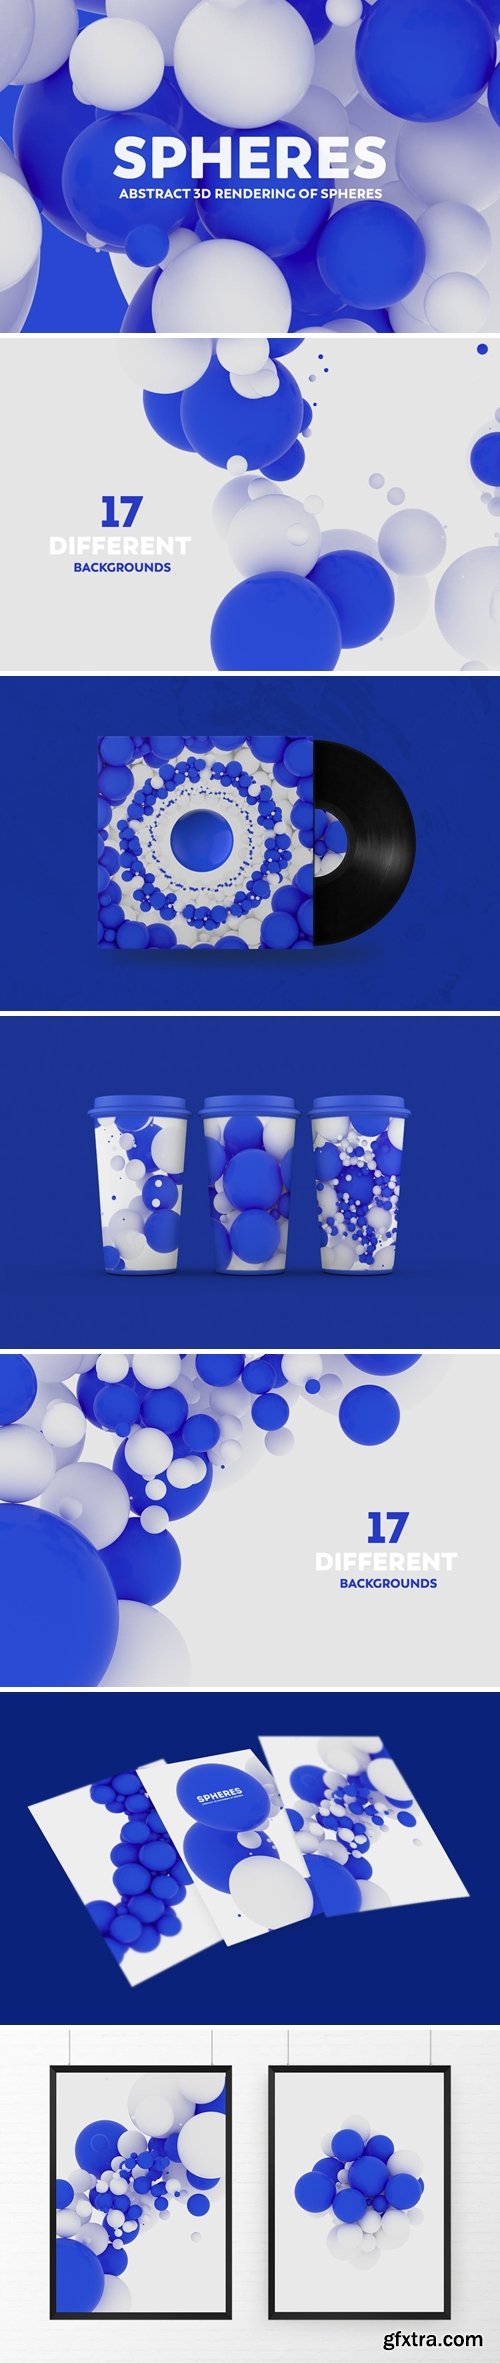 Abstract 3D Rendering Of Spheres -Blue And White